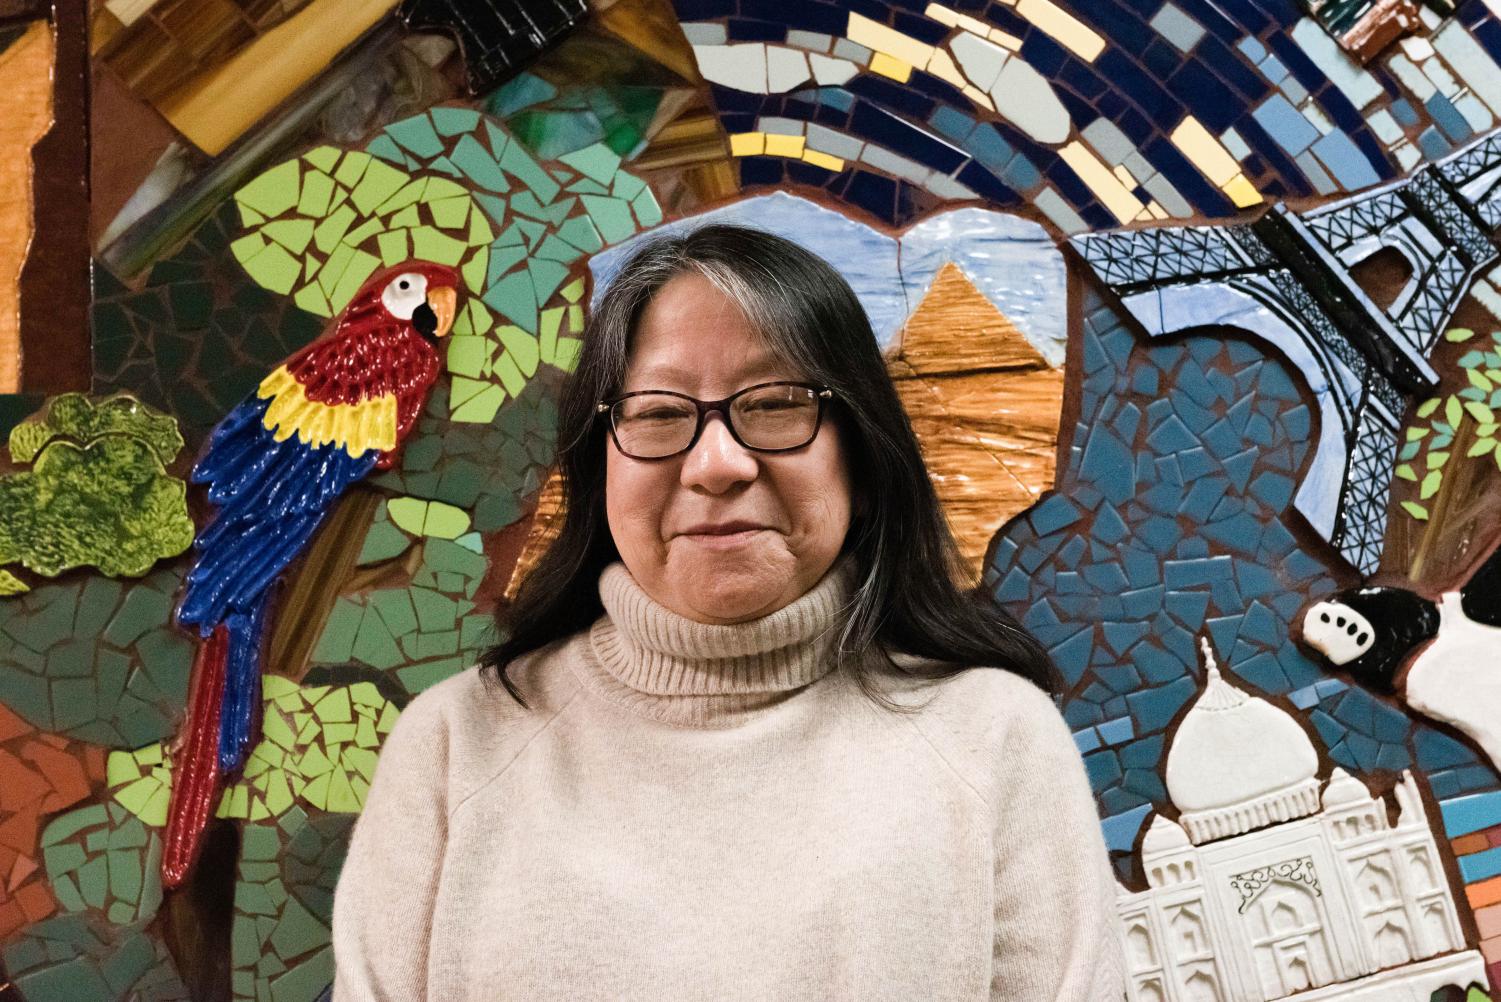 A+woman+wearing+a+tan+sweater+and+glasses+stands+in+front+of+a+mosaic+with+a+parrot.